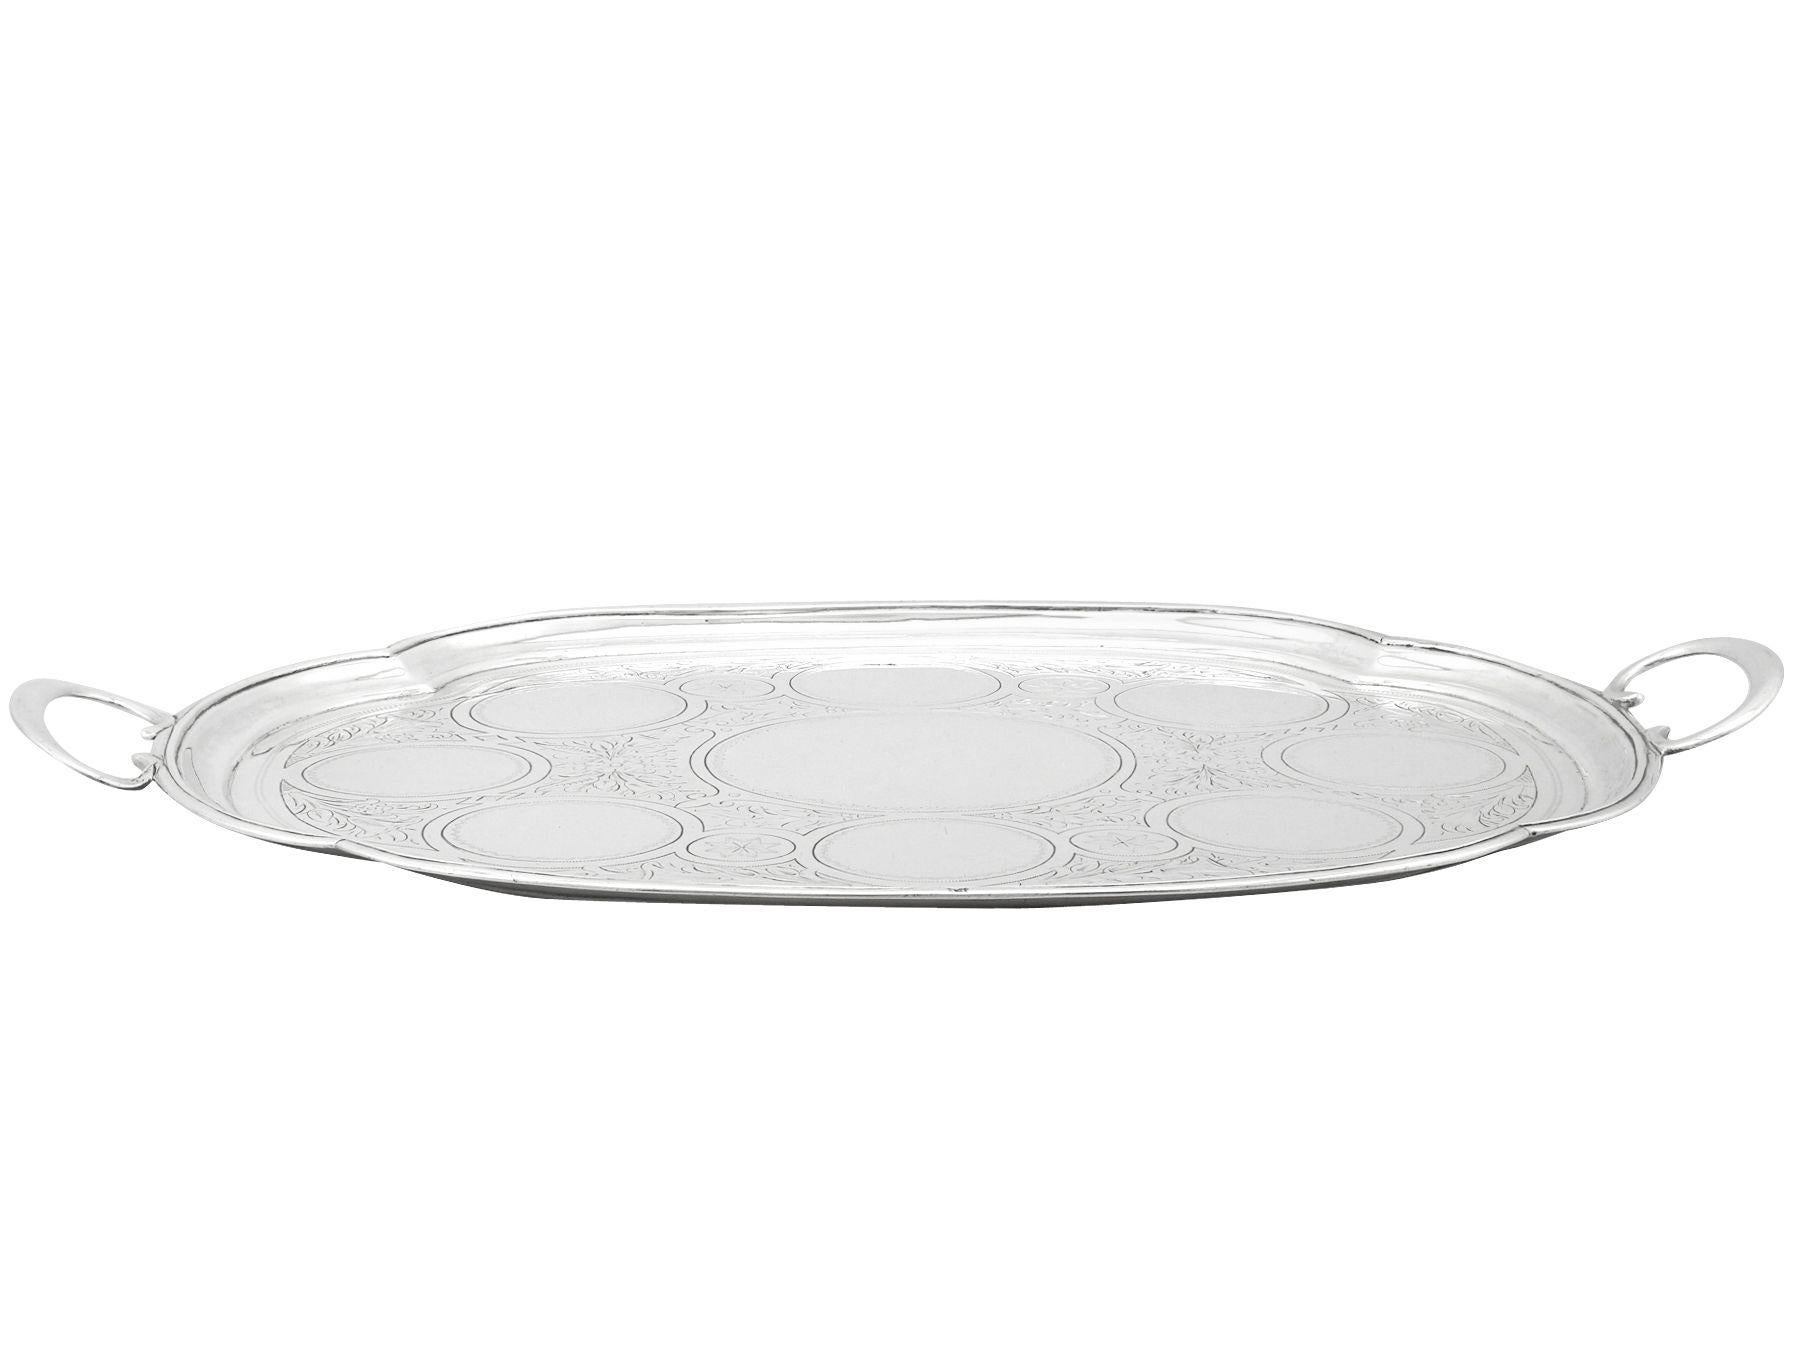 An exceptional, fine and impressive antique Russian silver drinks tray; an addition to our ornamental Russian silverware collection.

This fine antique Russian silver tray has an oval shaped form.

The surface of the drinks tray is embellished with